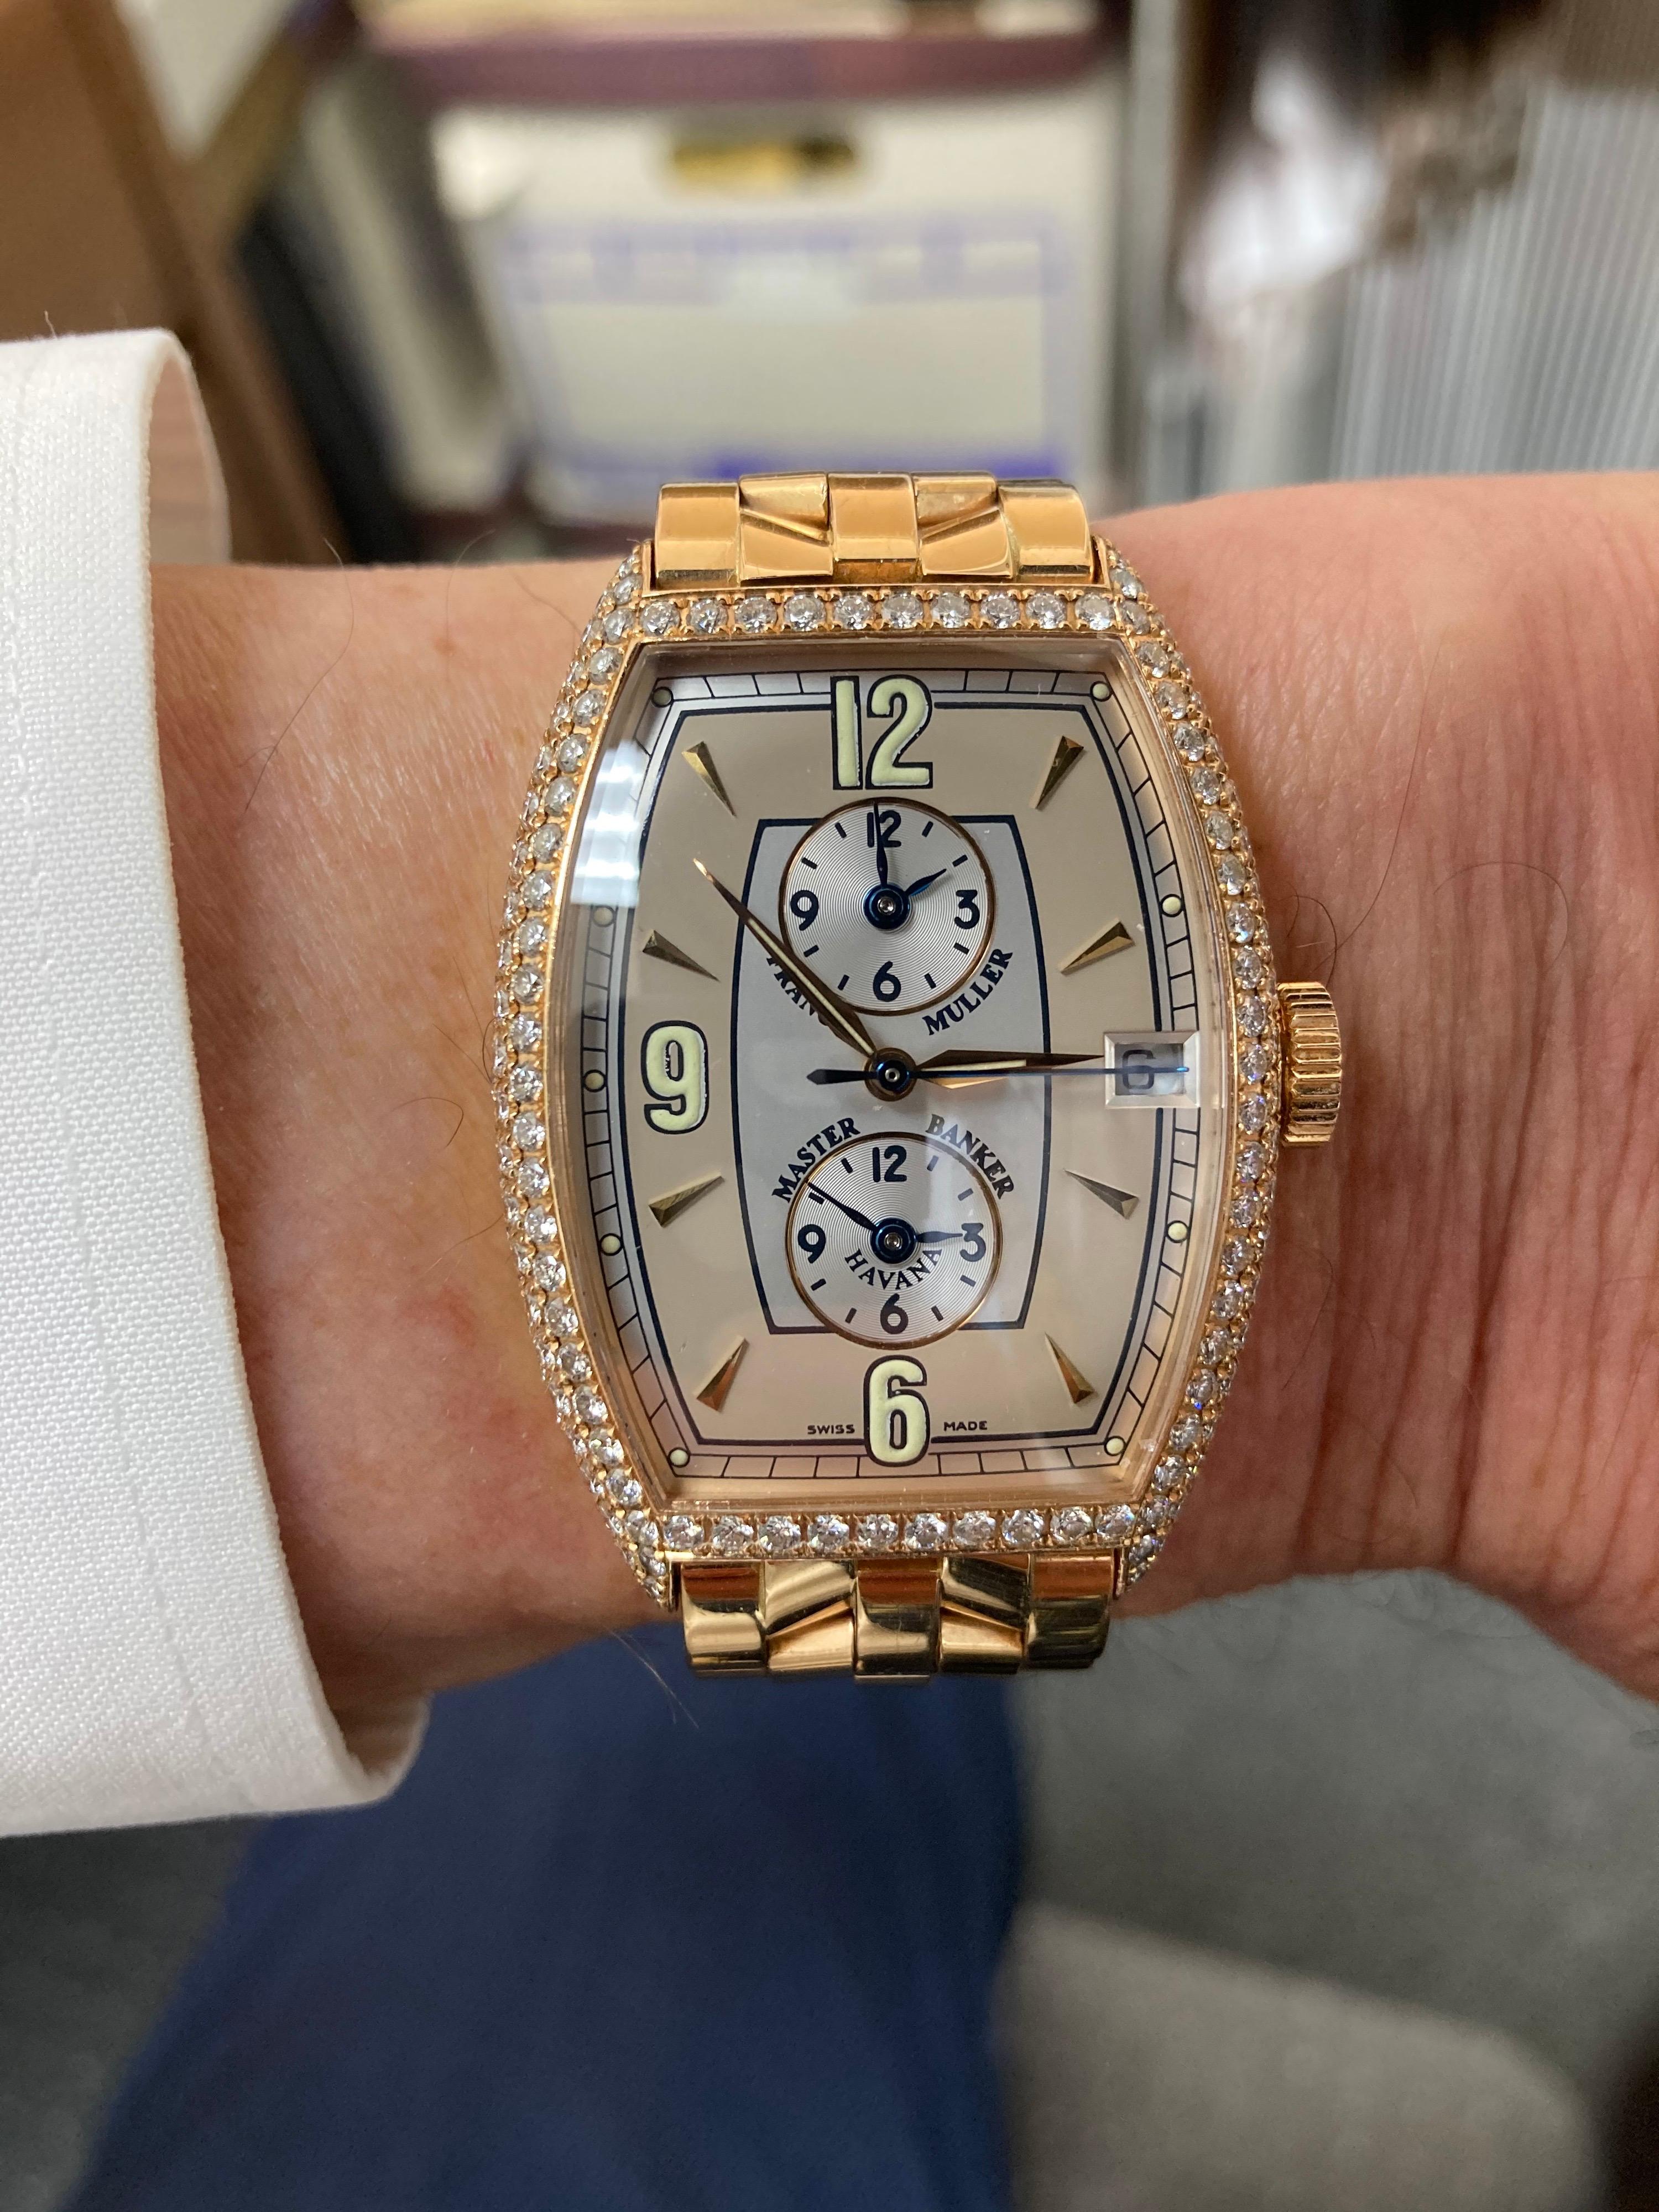 Franck Muller Master Banker 8850 Havana Model with diamond case in 18k pink gold, fits a small wrist size.  This is an automatic 3 time zone wristwatch with date.
CASE SIZE: 31.5mm by 44.5mm (1.25